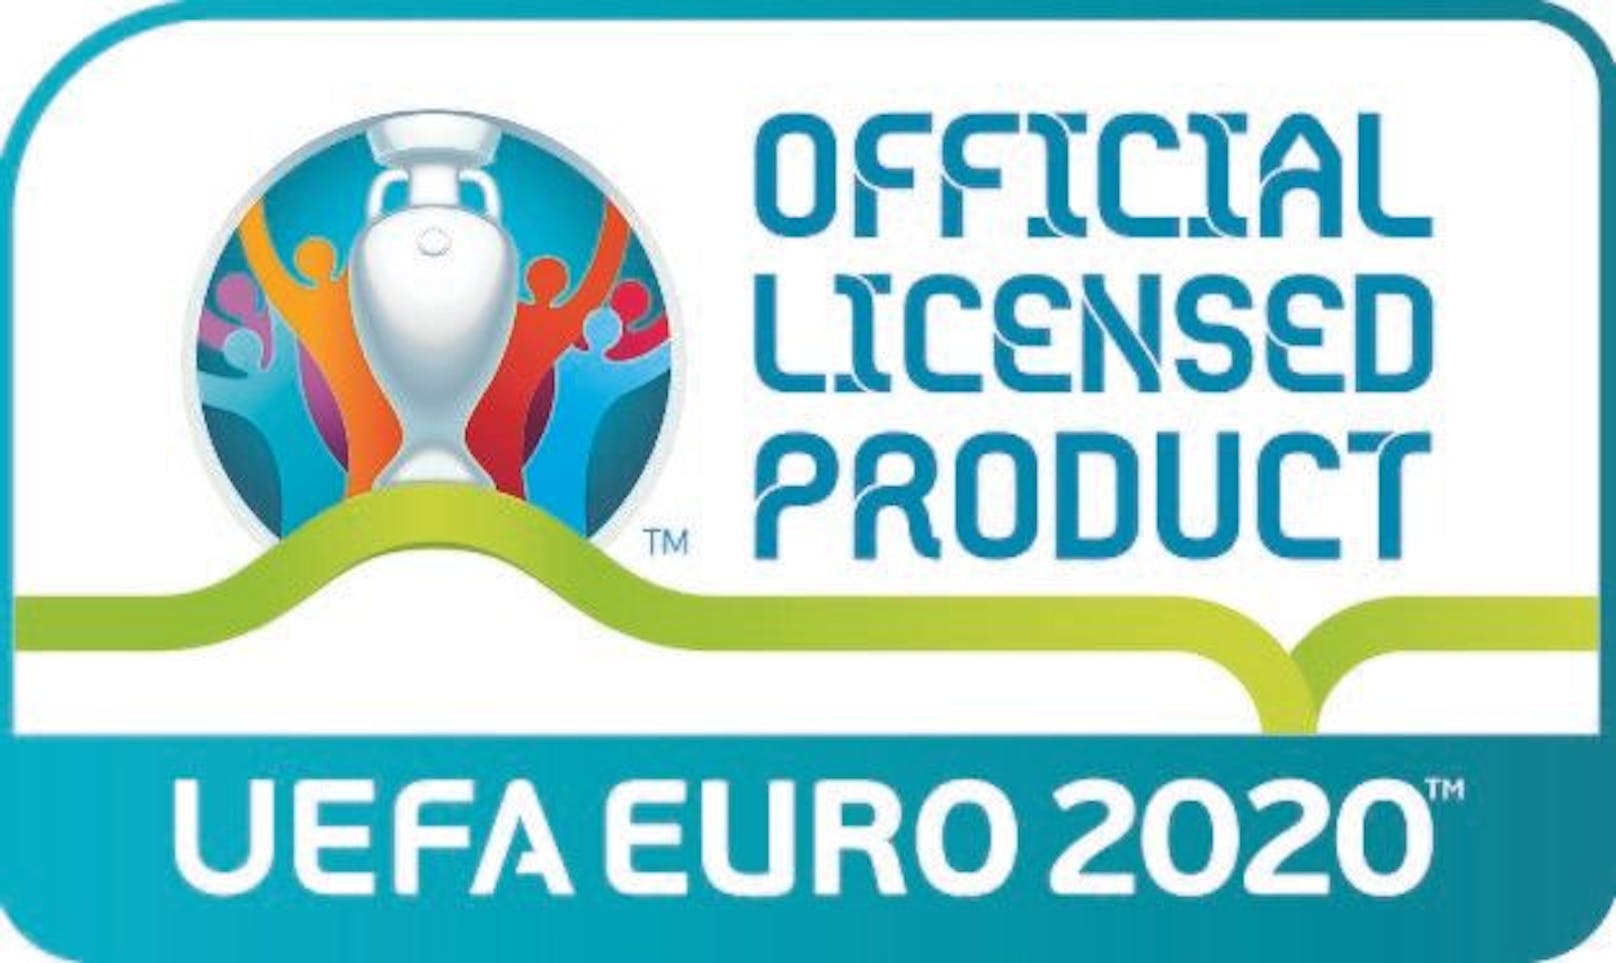 The UEFA and EURO 2020 words, the UEFA EURO 2020 Logo and Mascot and the UEFA European Football Championship Trophy are protected by trademarks and/or copyright of UEFA. All rights reserved.